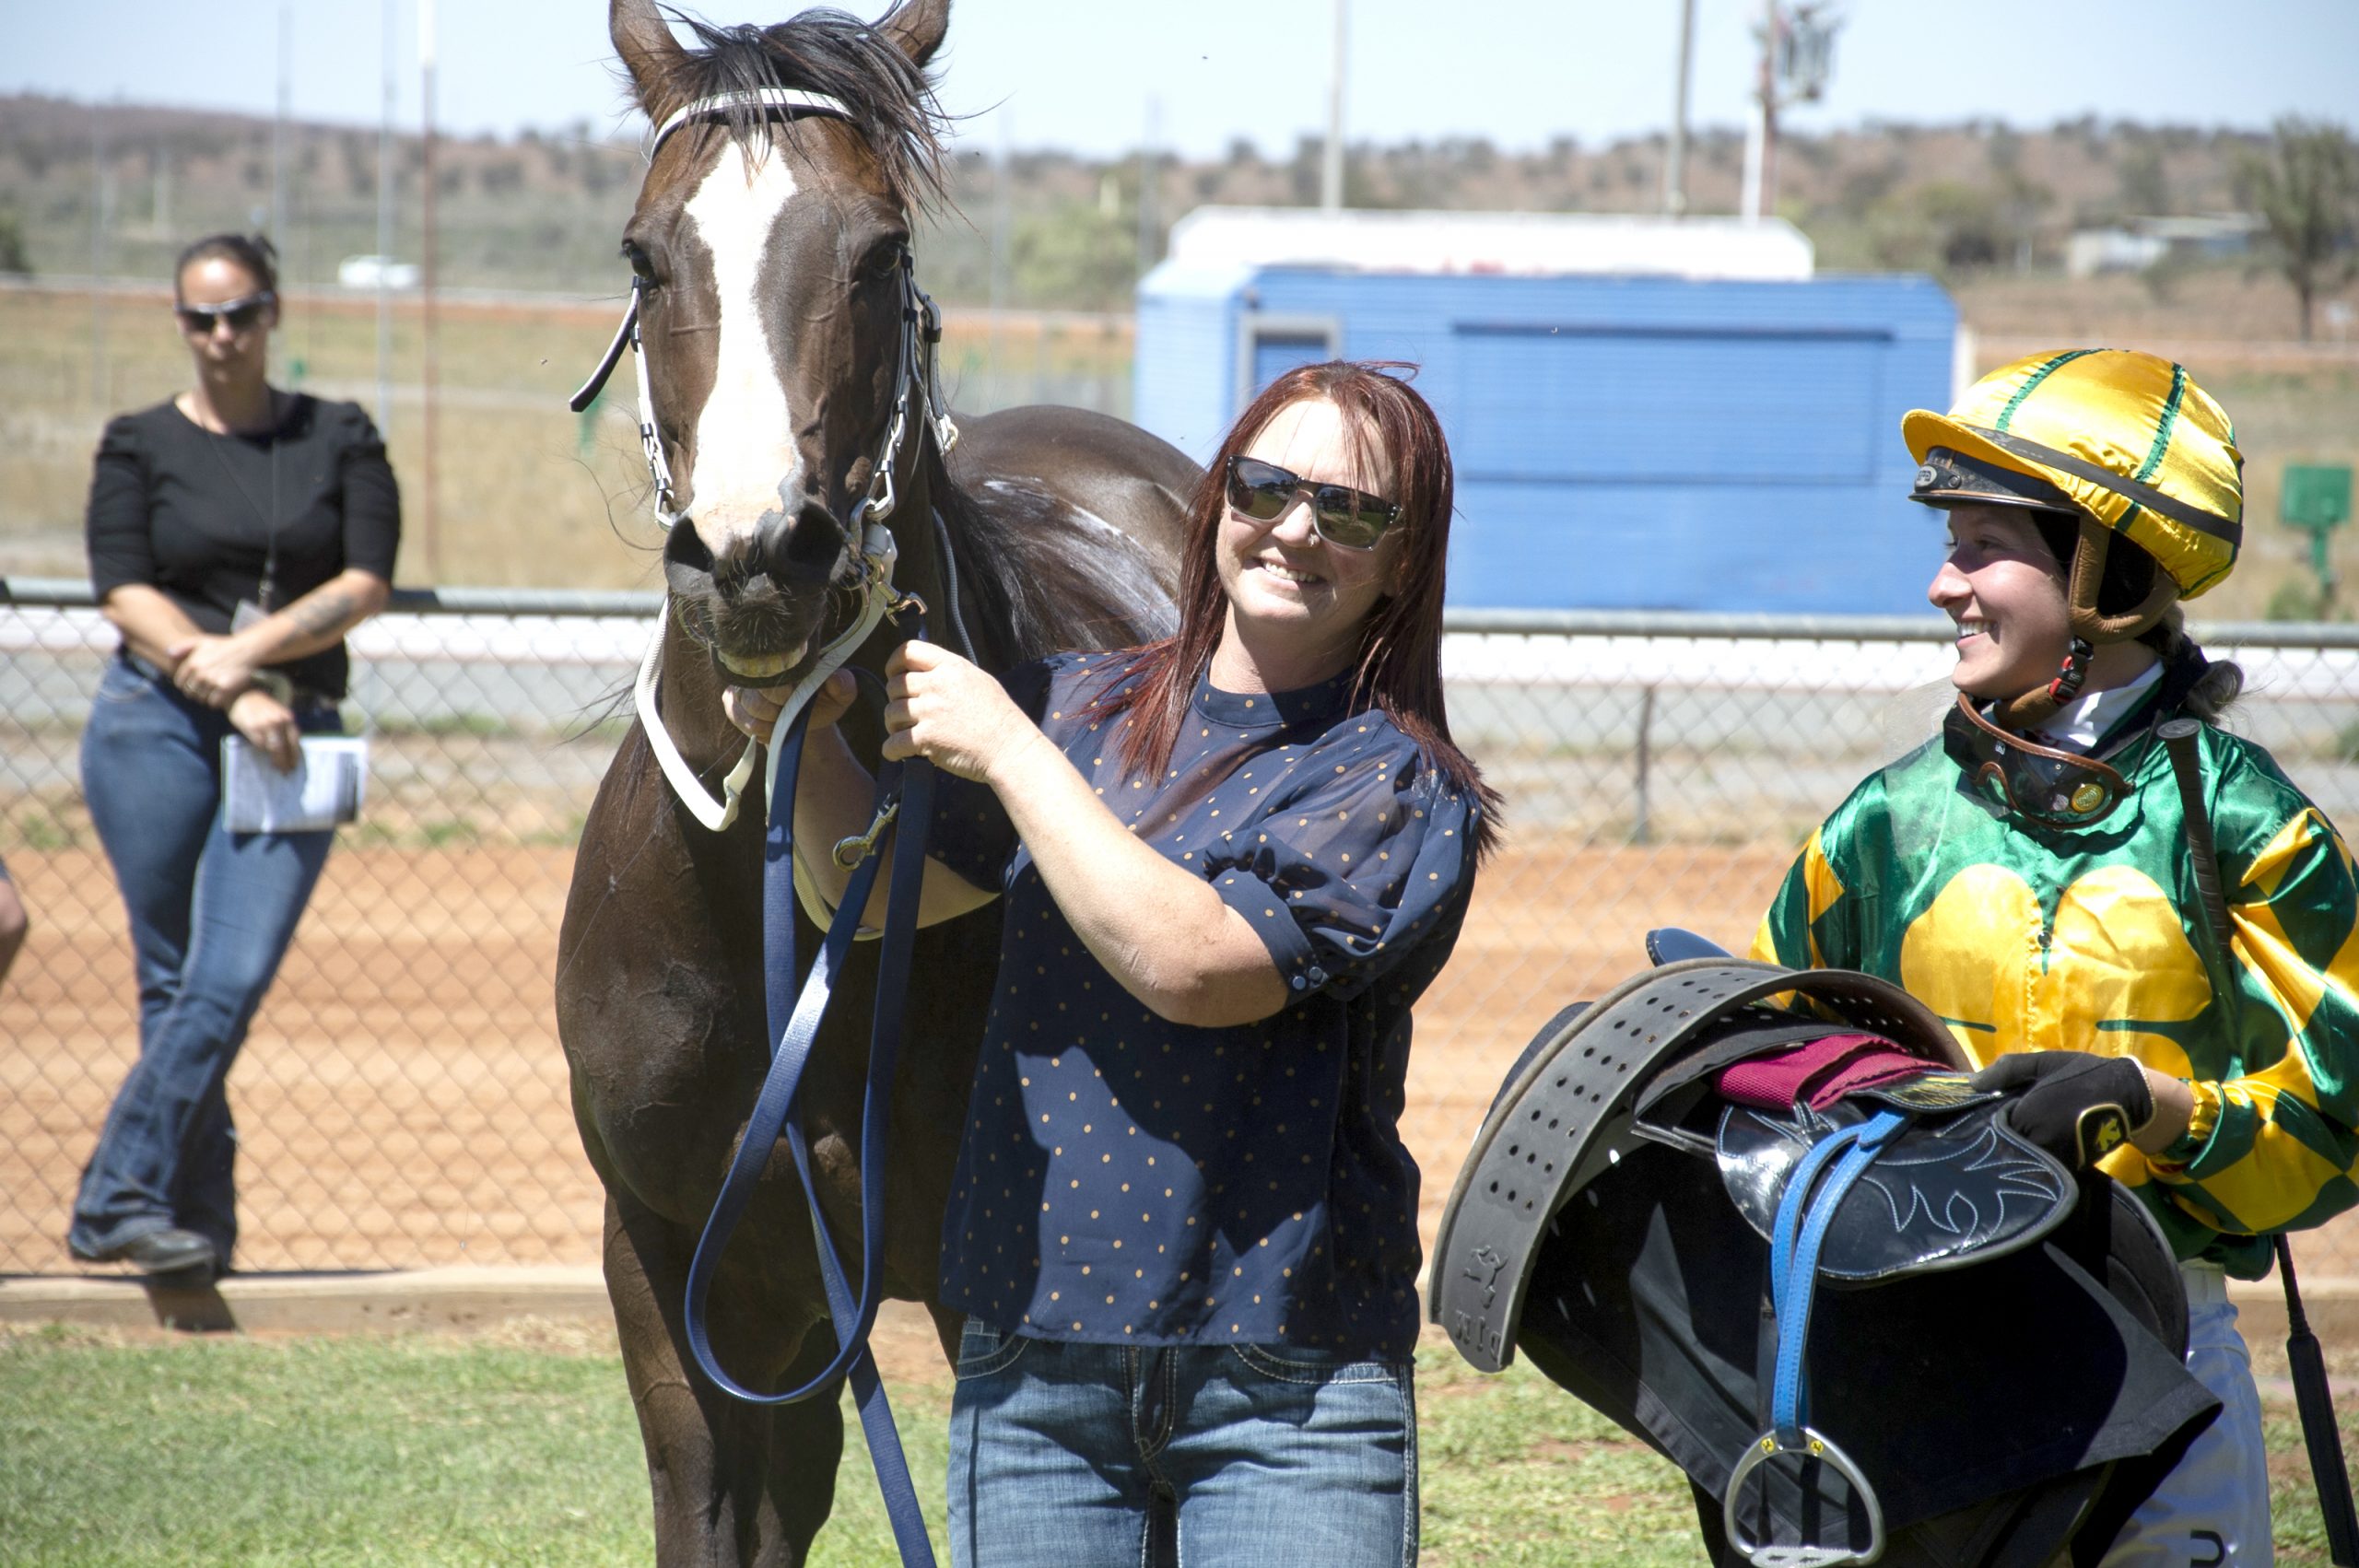 Local trainer Heidi Smith celebrates a win at her home track with jockey Margaret Collett and Meteor’s Man. PICTURE: PATRICK REINCKE